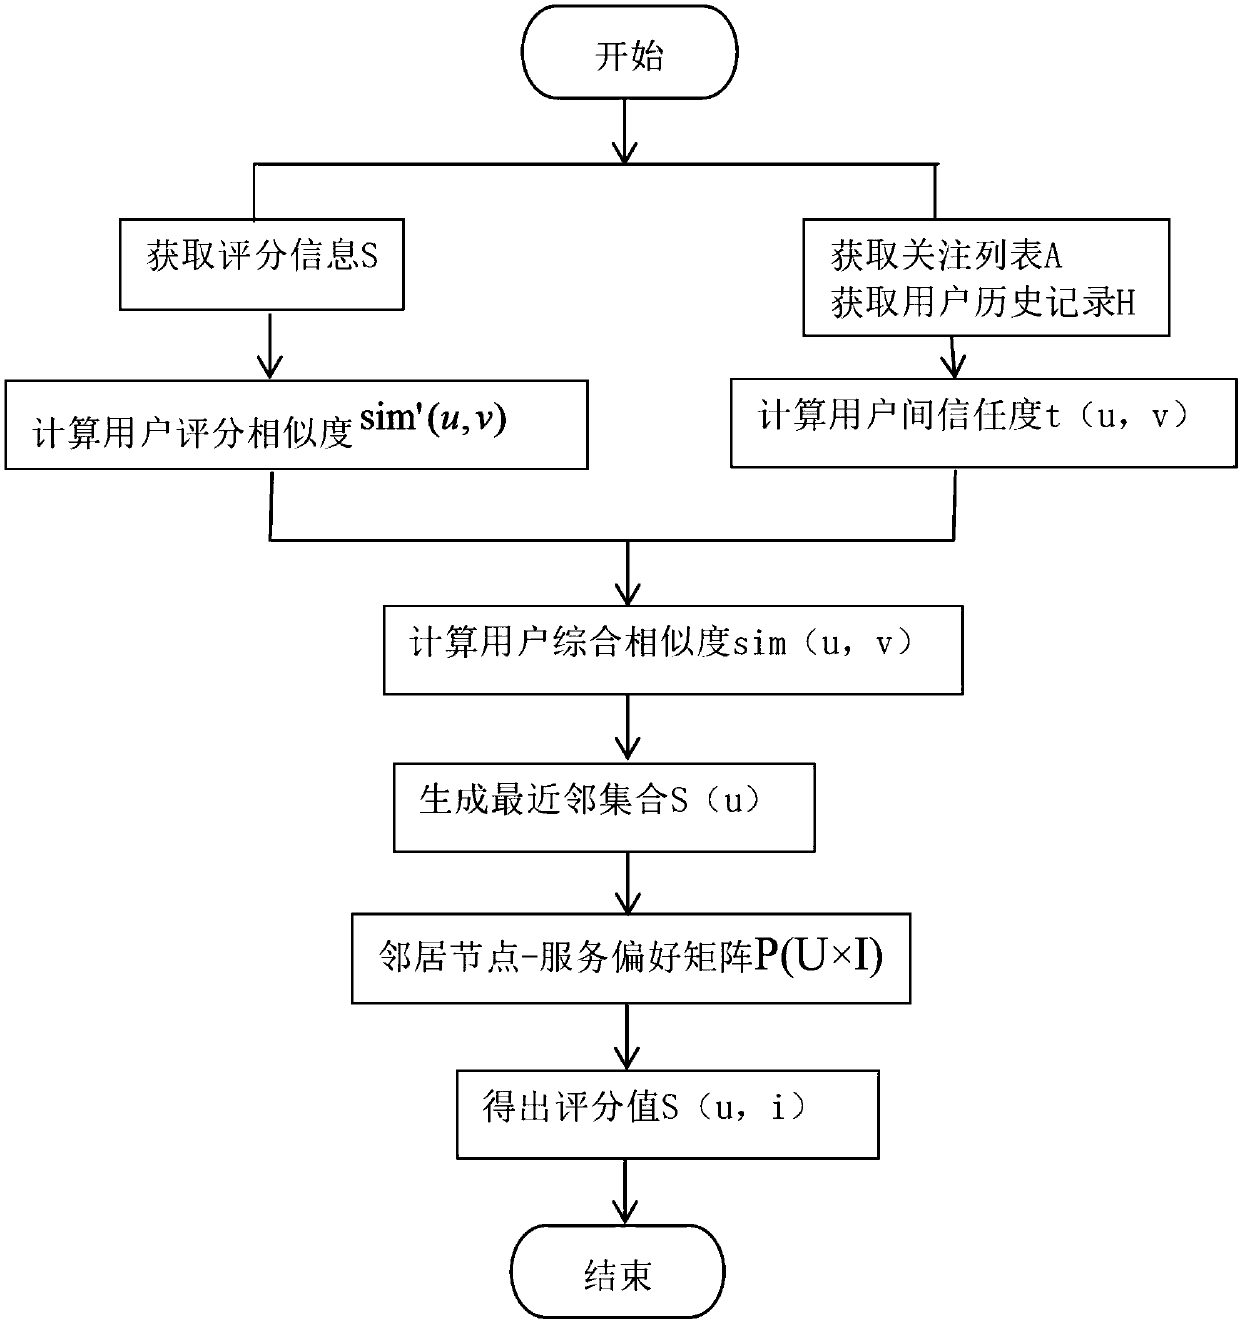 Method of recommending elderly care service